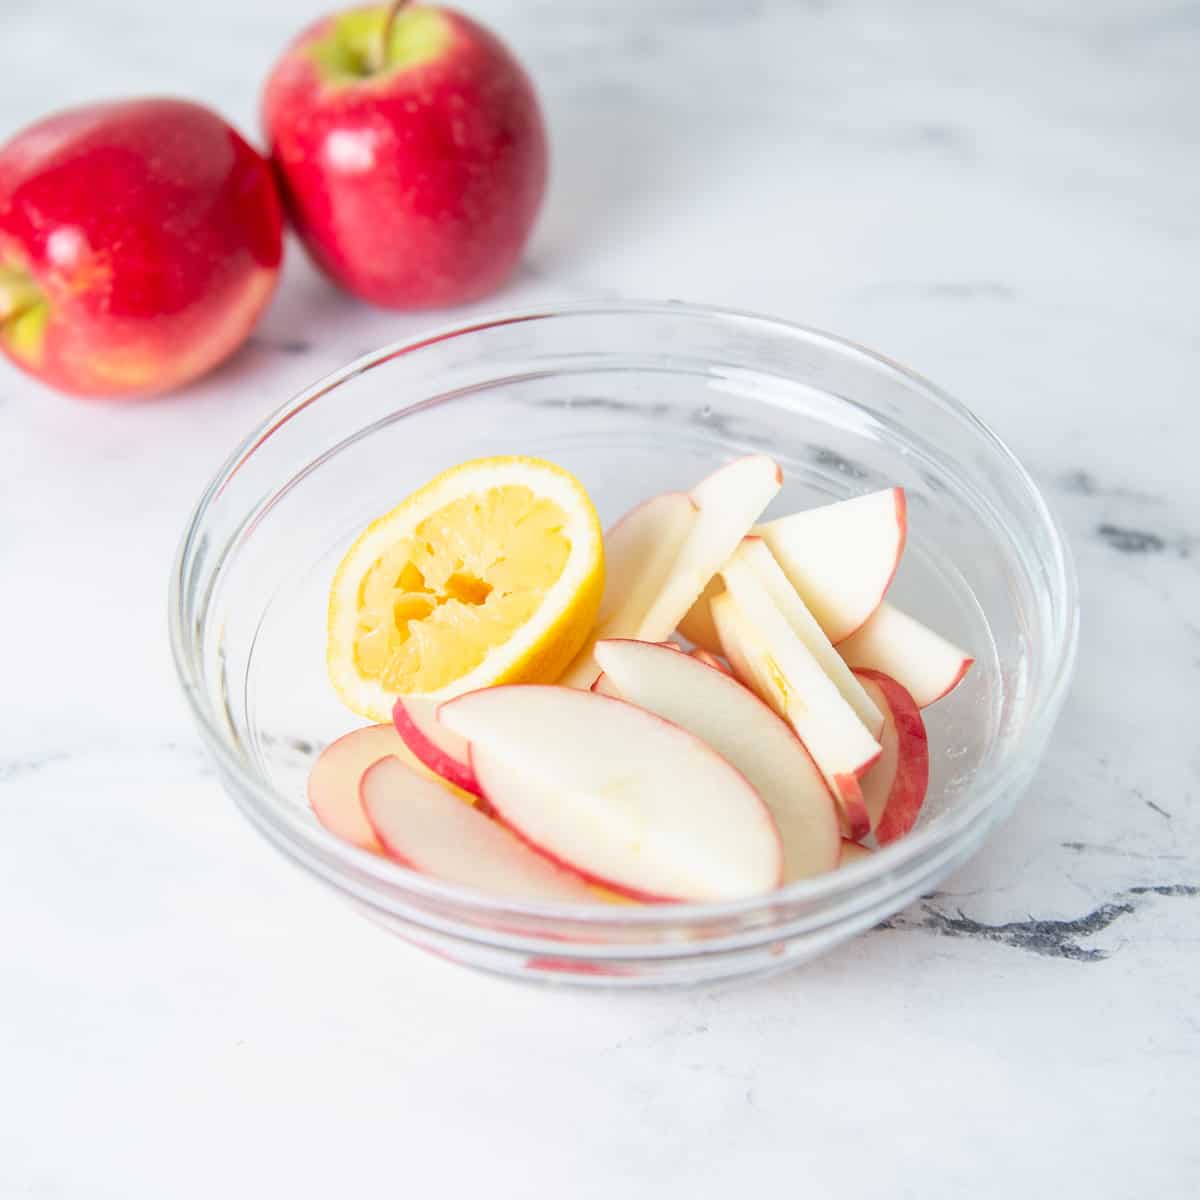 Sliced apples in a clear class bowl with lemon juice.